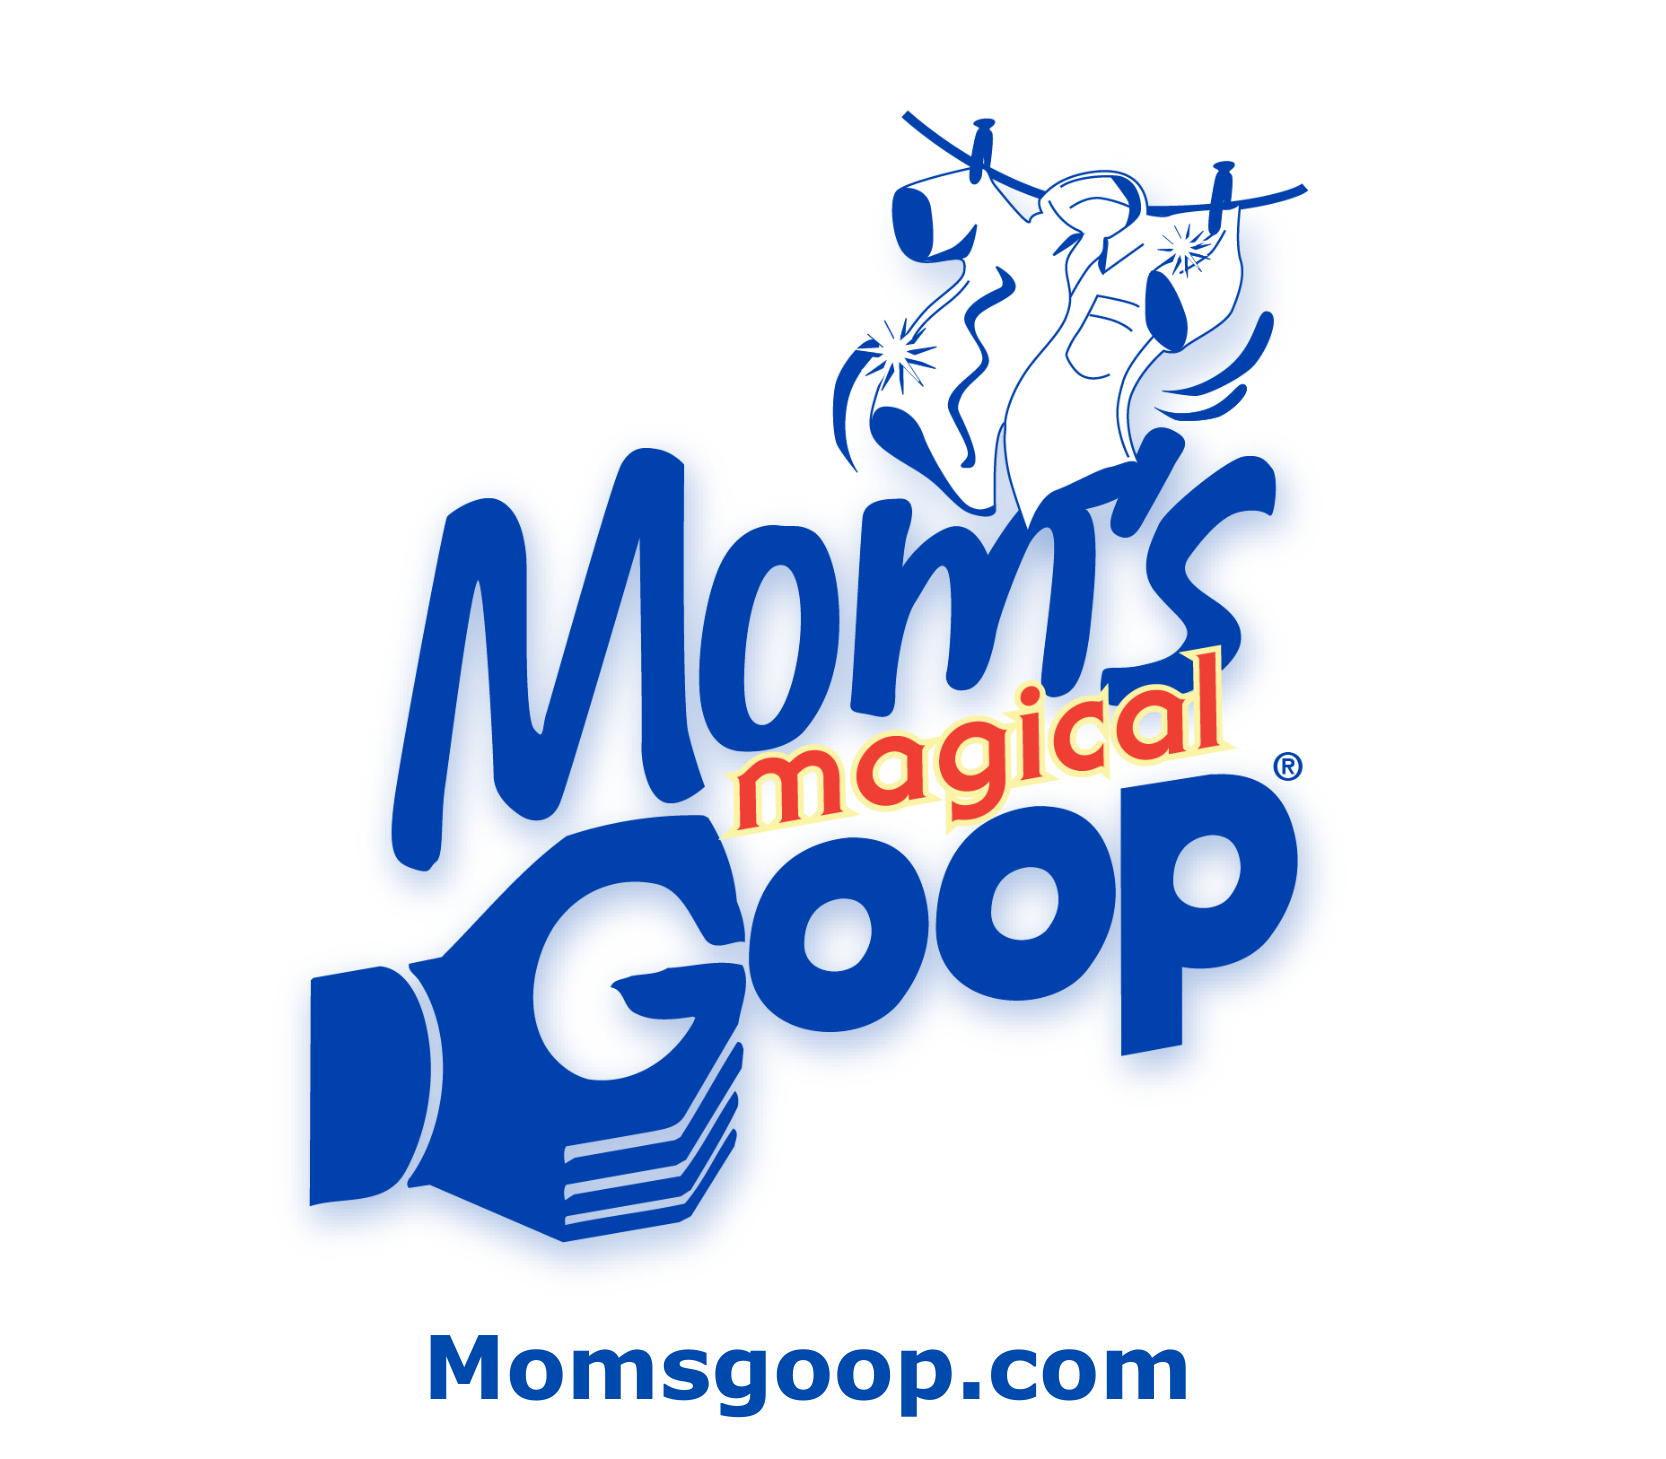 All Goop Products on Momsgoop.com